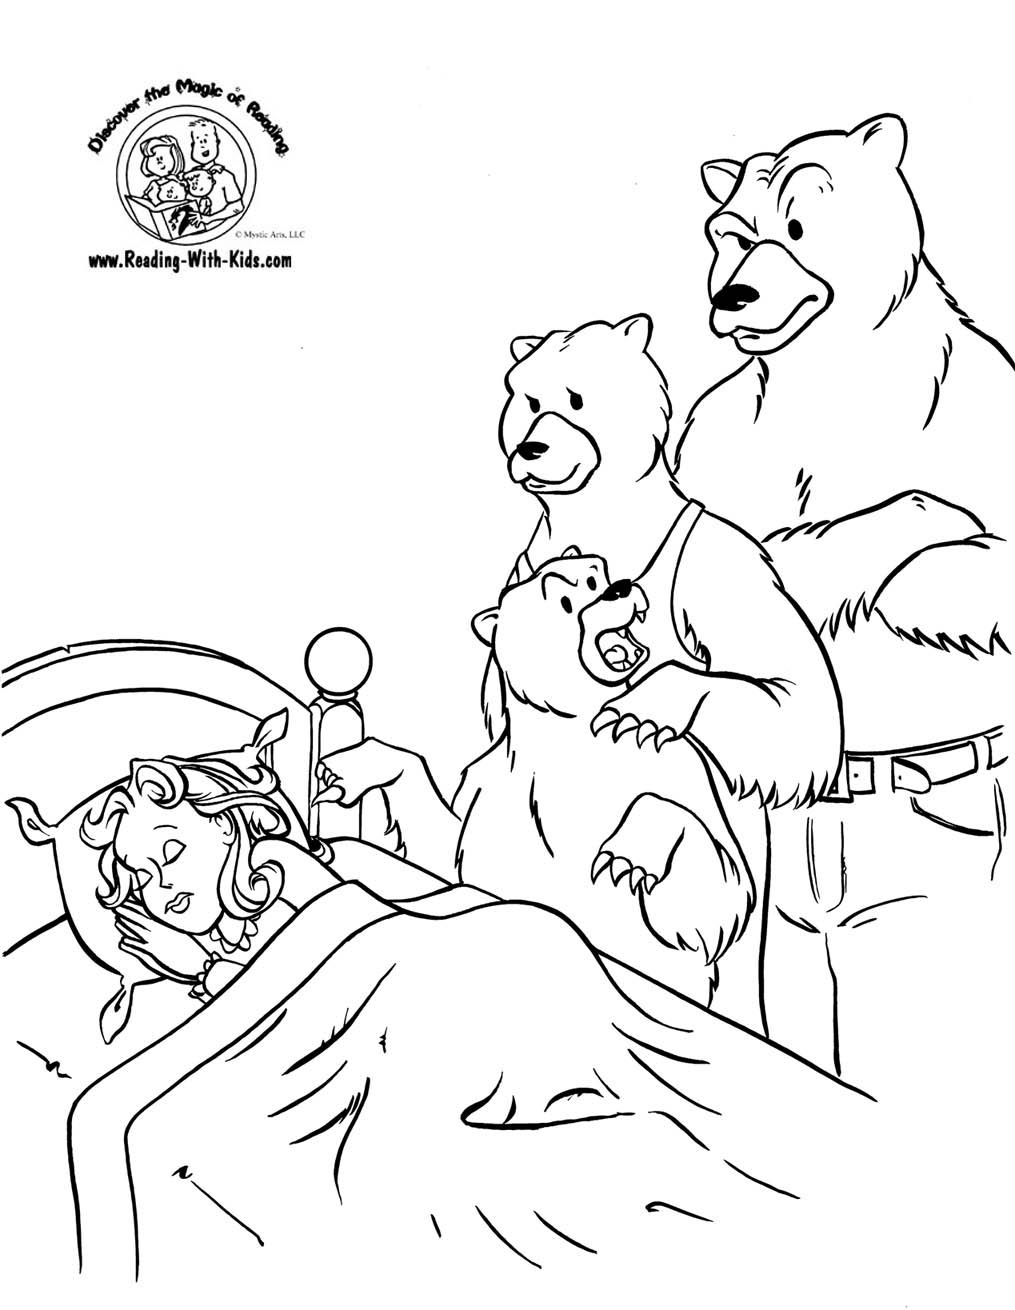 Fairy Tale Coloring Pages - Coloring Home